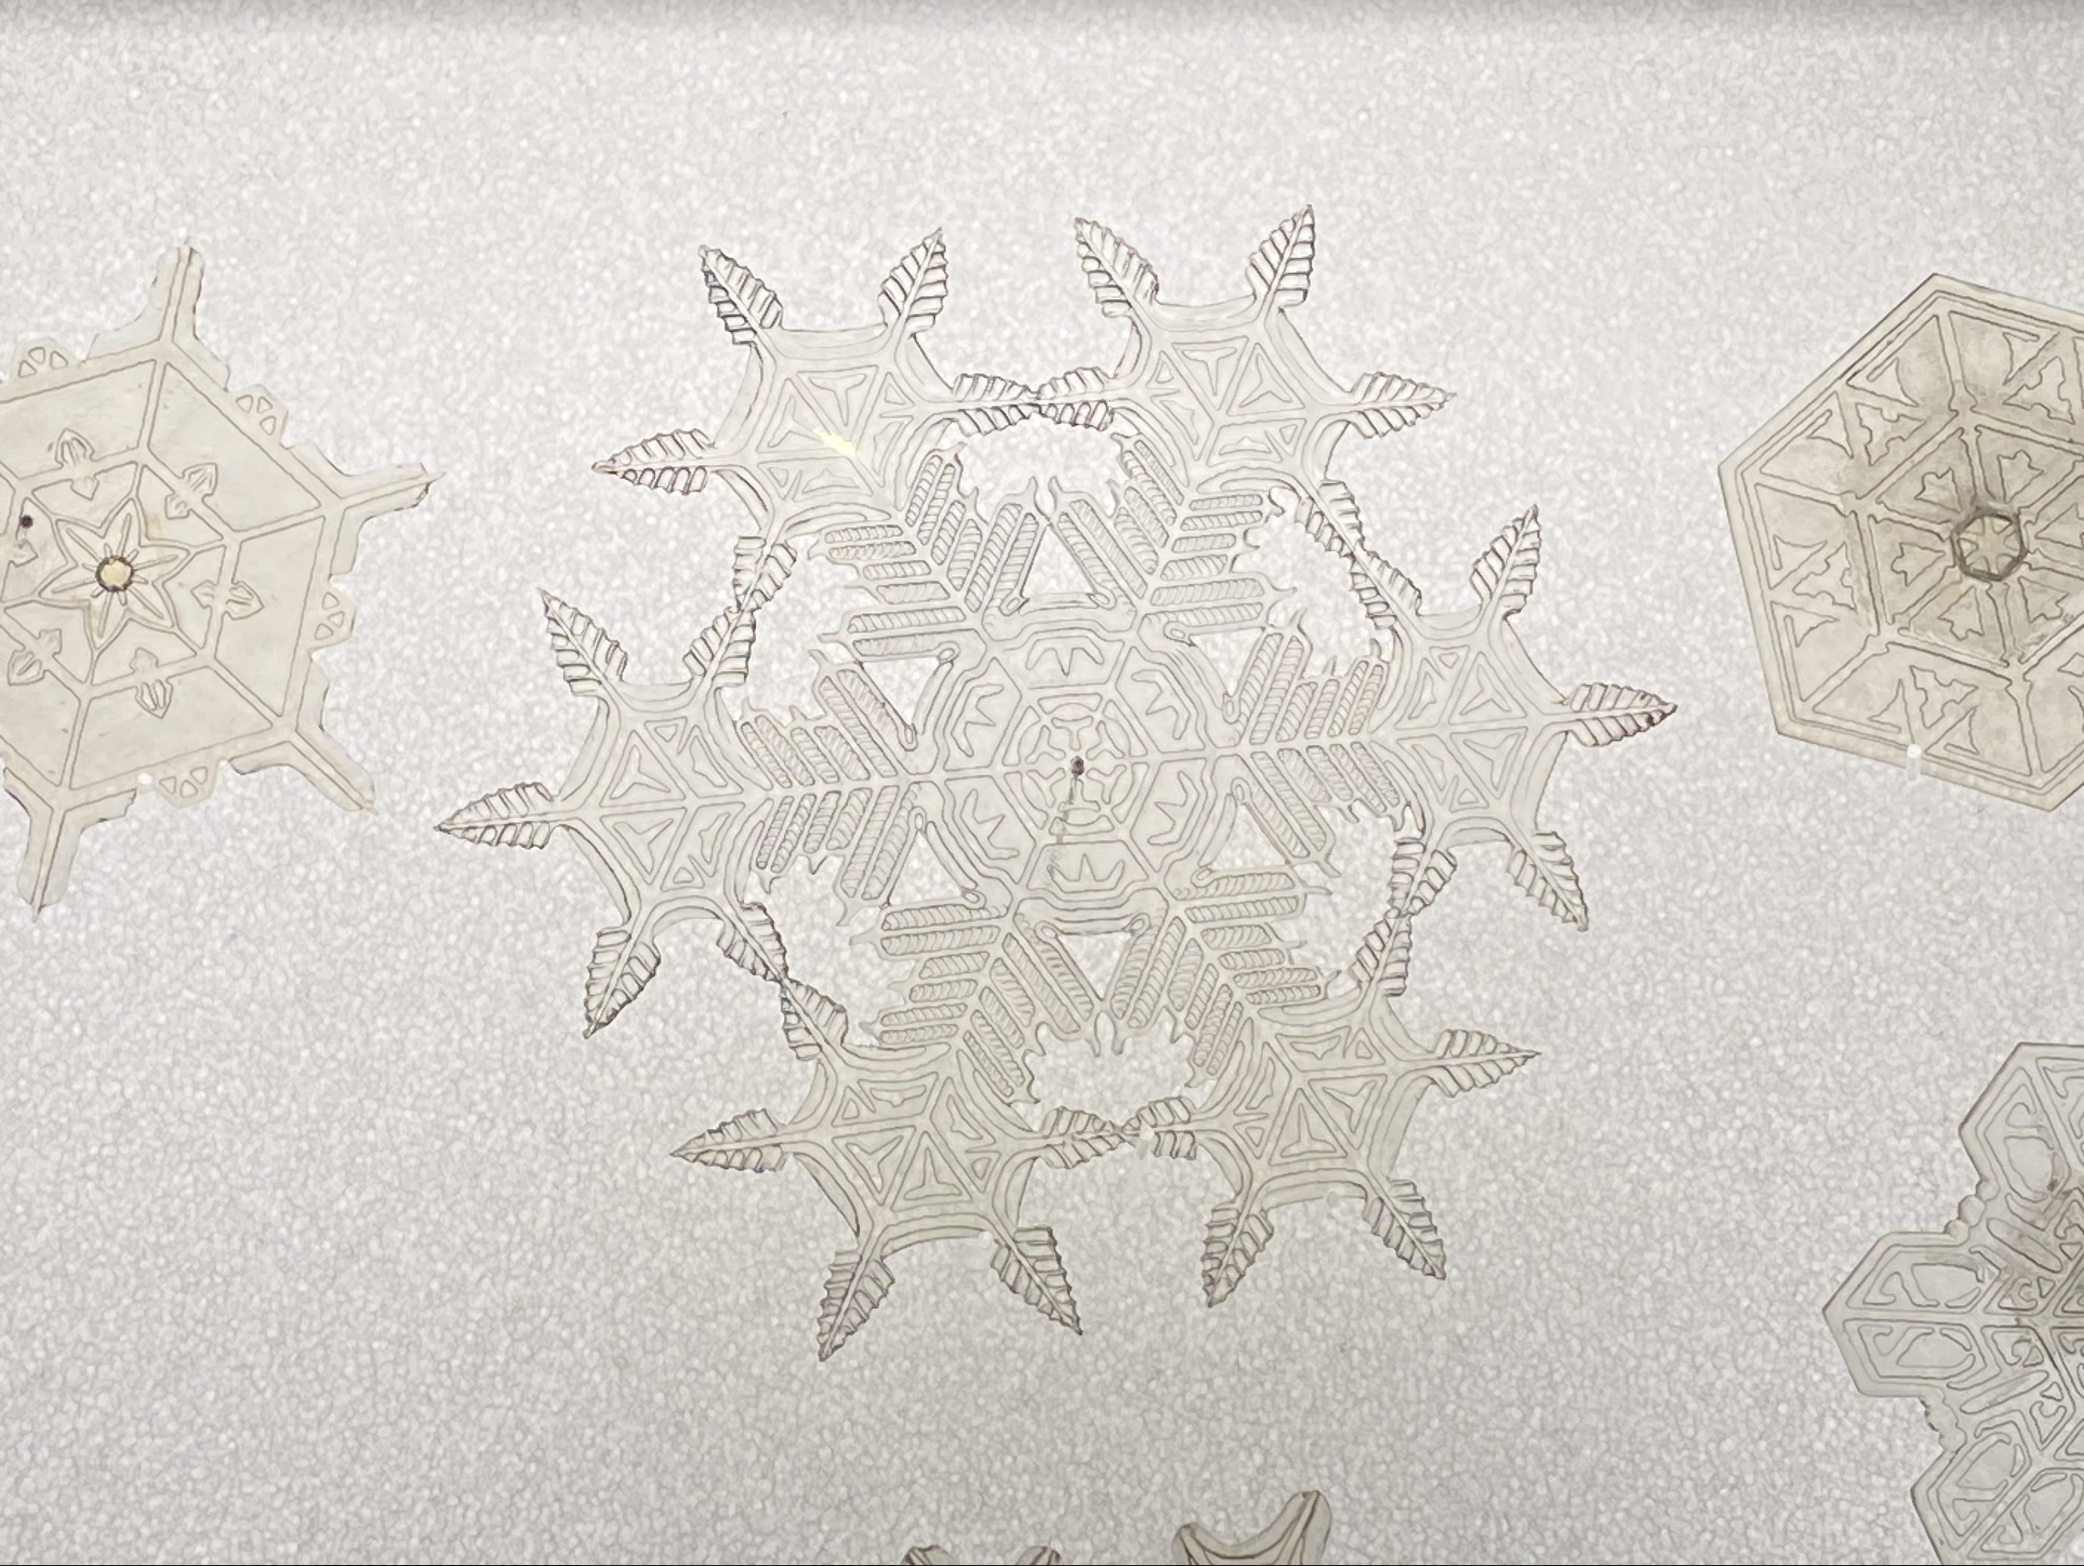 Nathan Coleman: These intricate models of snow crystals were created by Edwin Reiber for the Cranbrook Institute of Science (Michigan). The models were the "first accurate models of snow crystals" 2